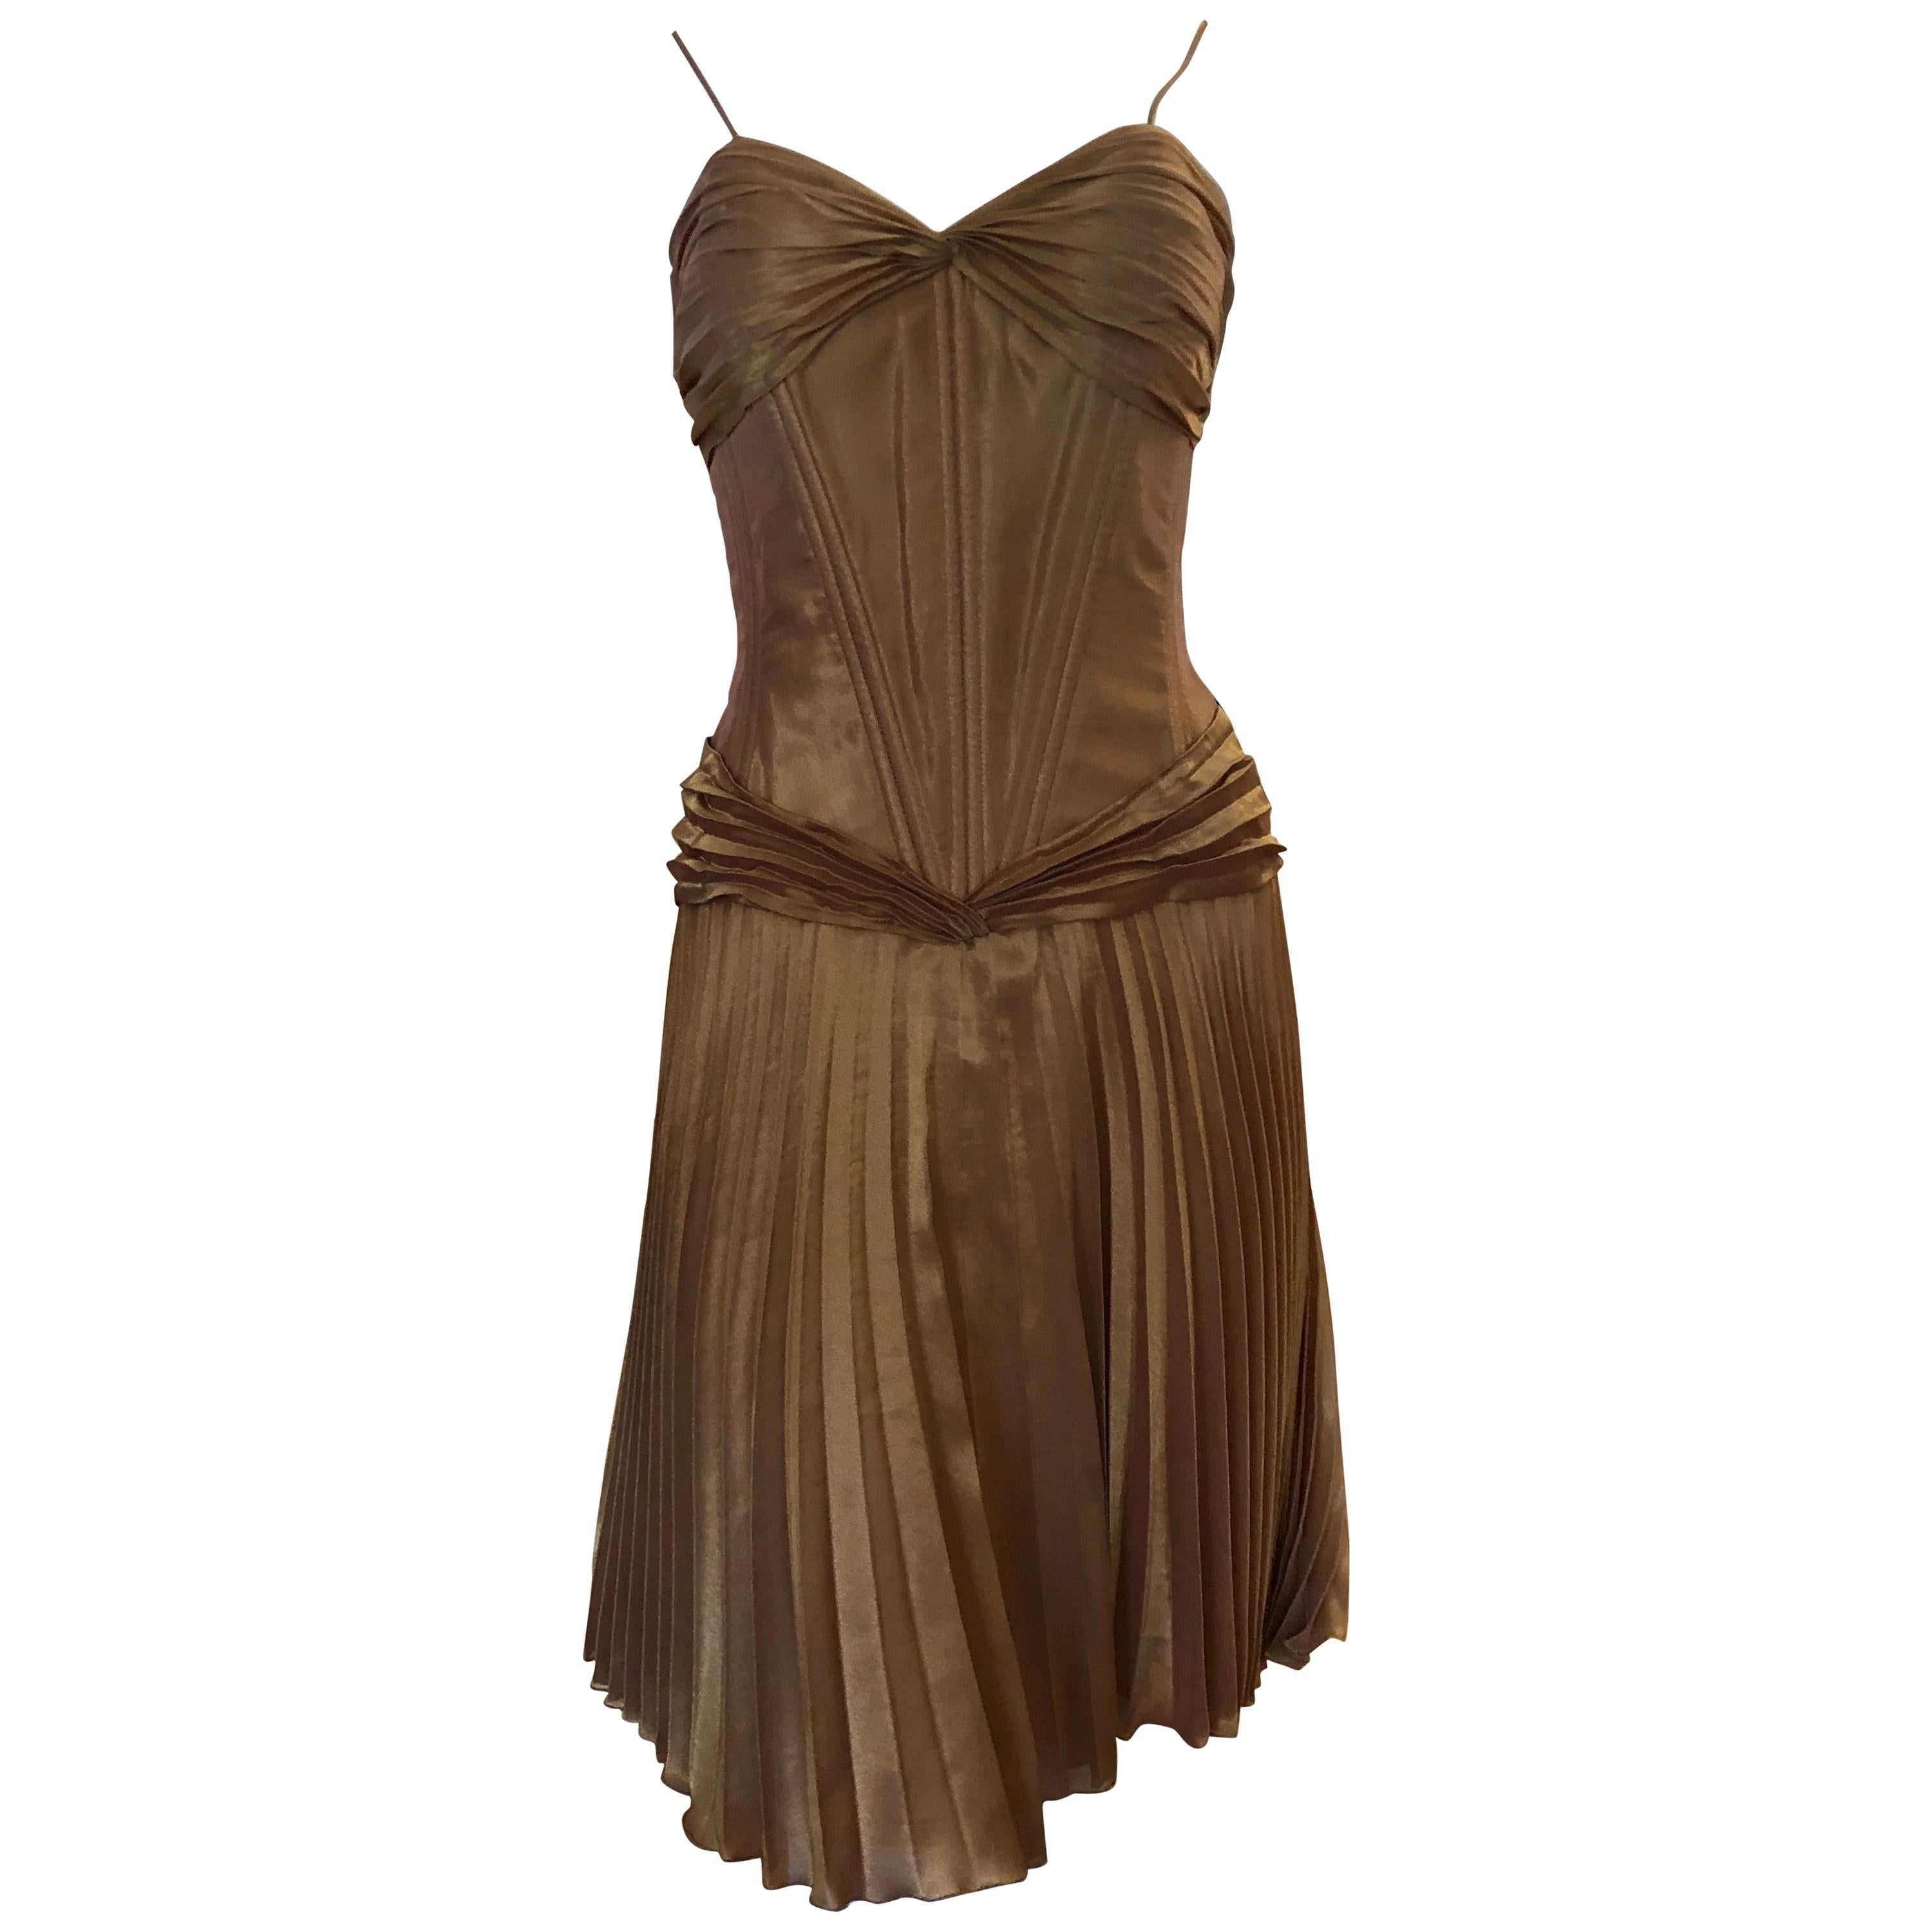 Superb 1980s Vicky Tiel Couture Metallic Gold Lame Dress with Bolero (38)